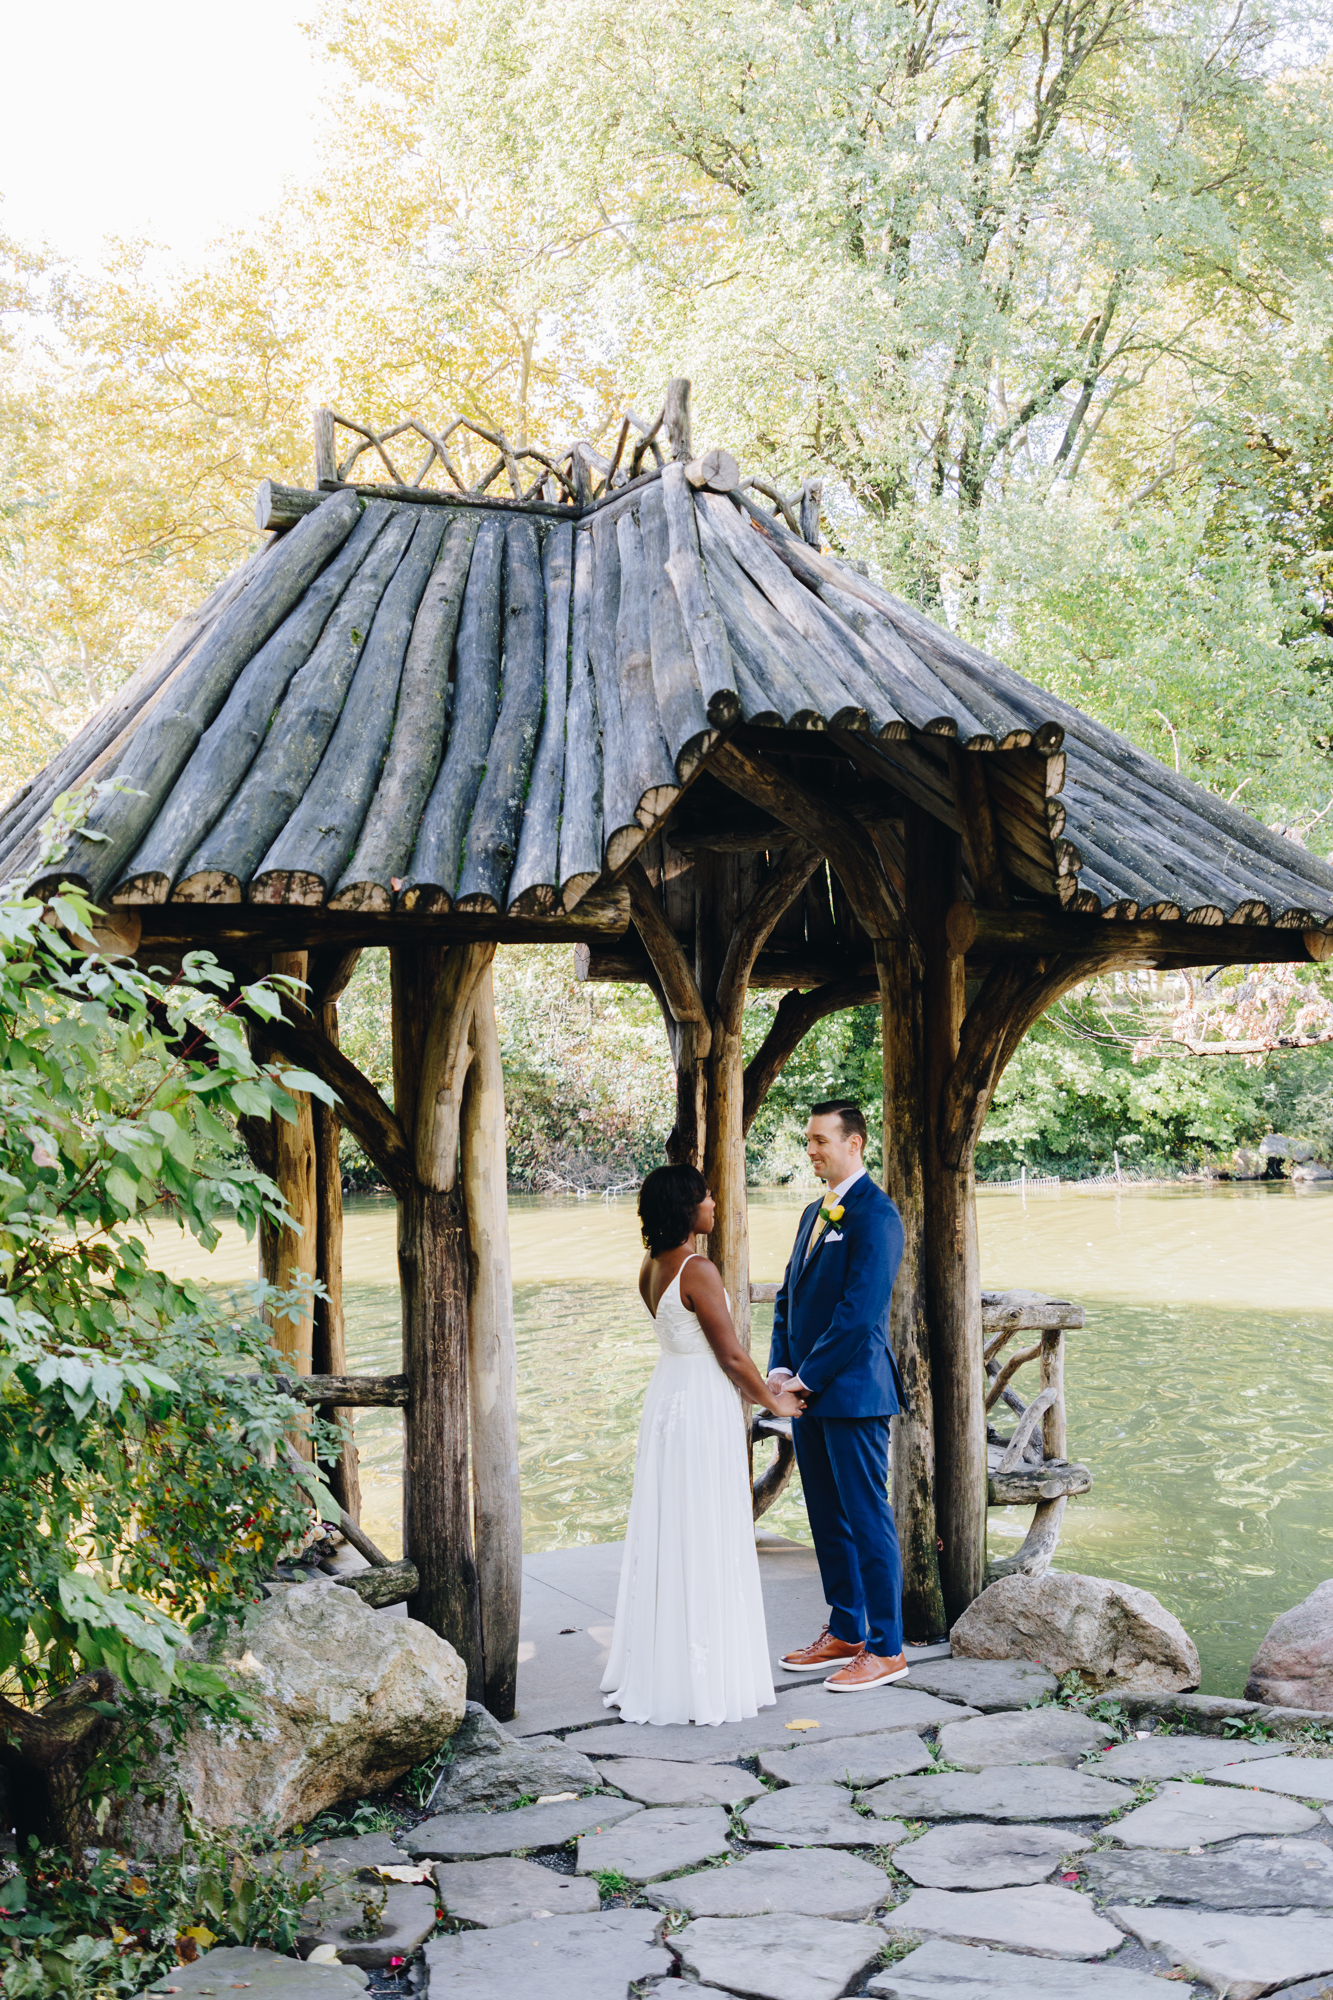 Beautiful Wagner Cove Elopement in New York City's Beautiful Central Park